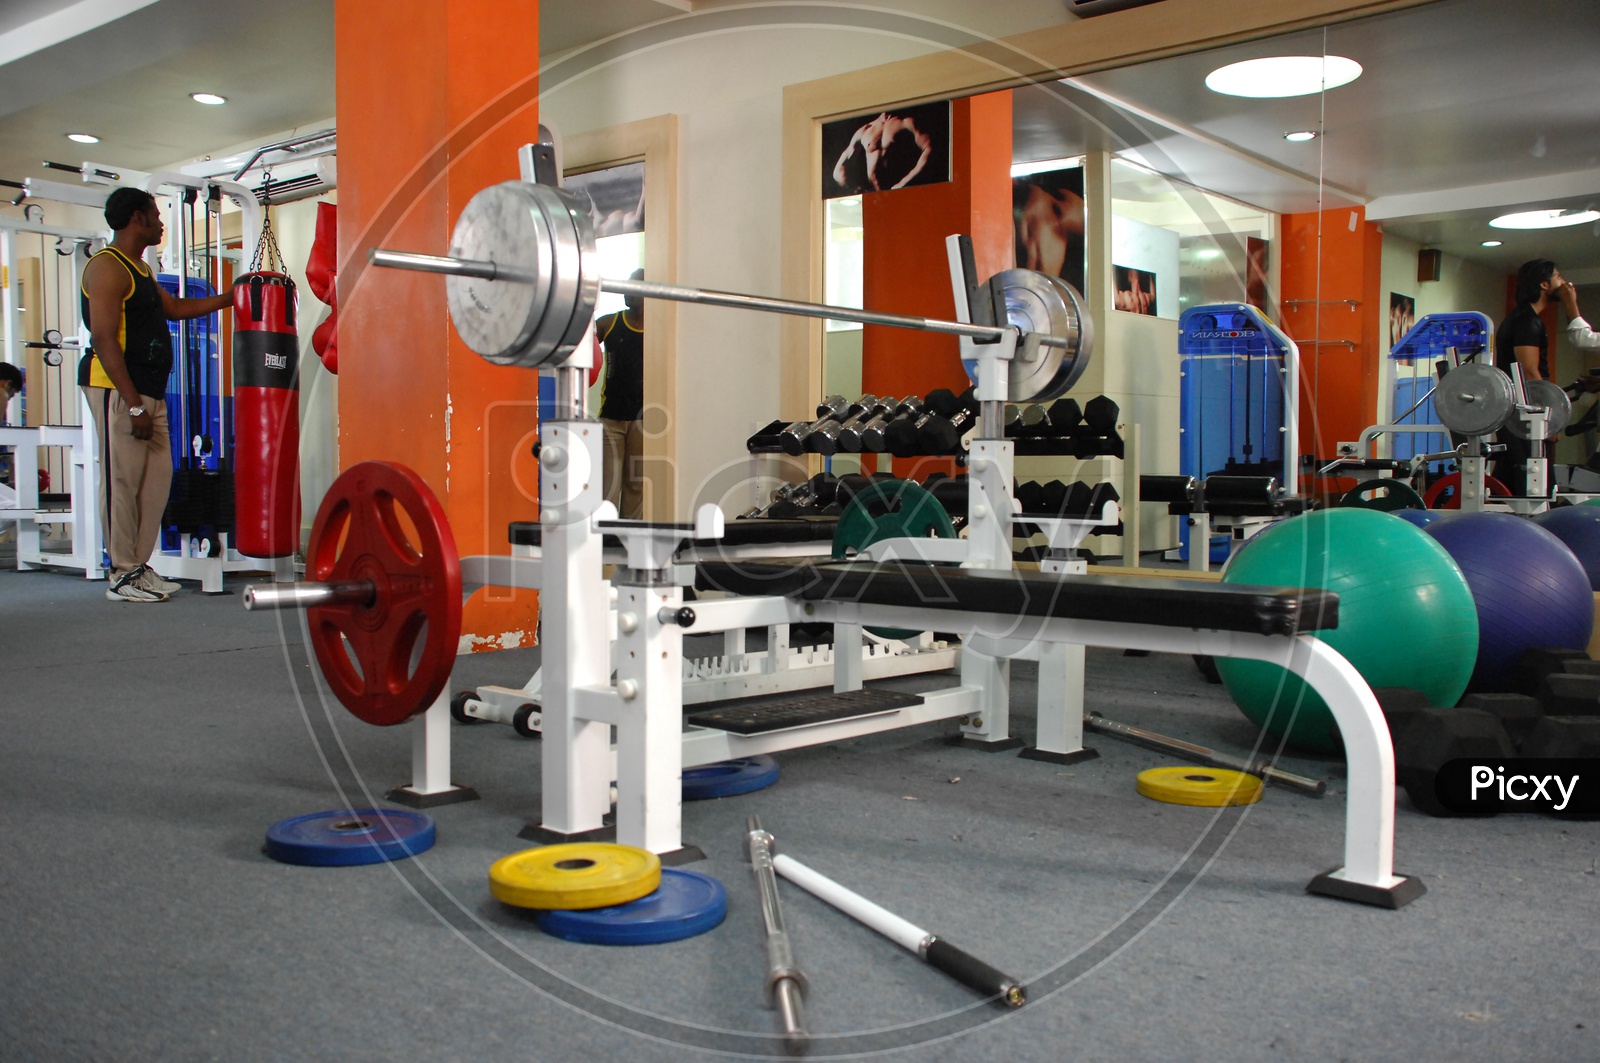 Fitness and strengthening equipment in the gym - weight lifts